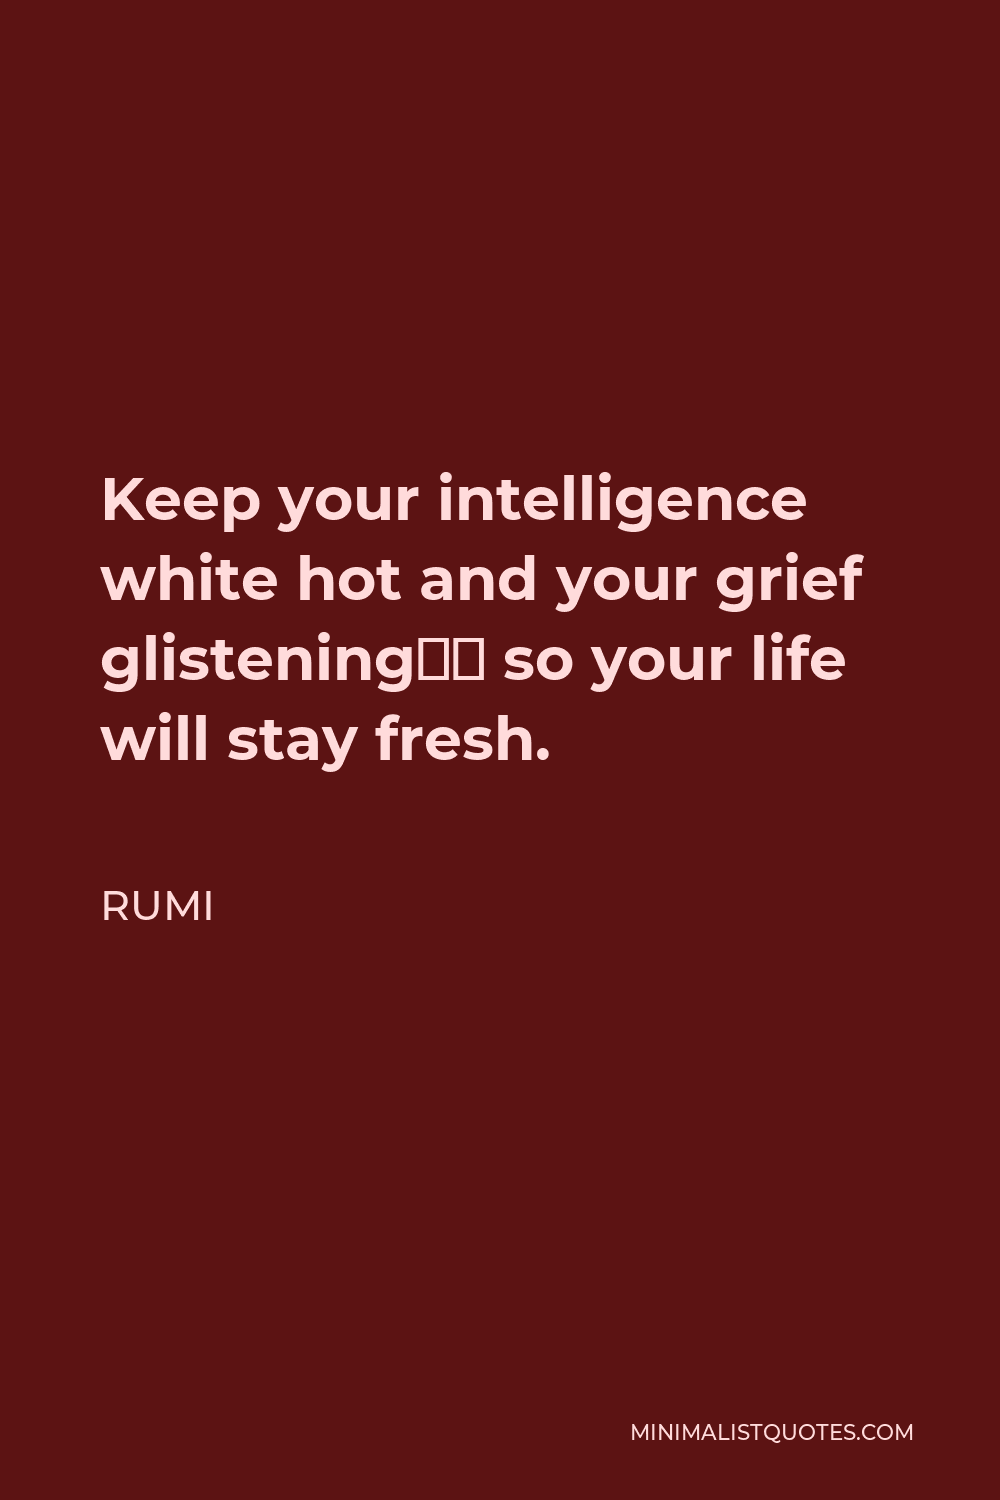 Rumi Quote - Keep your intelligence white hot and your grief glistening“ so your life will stay fresh.